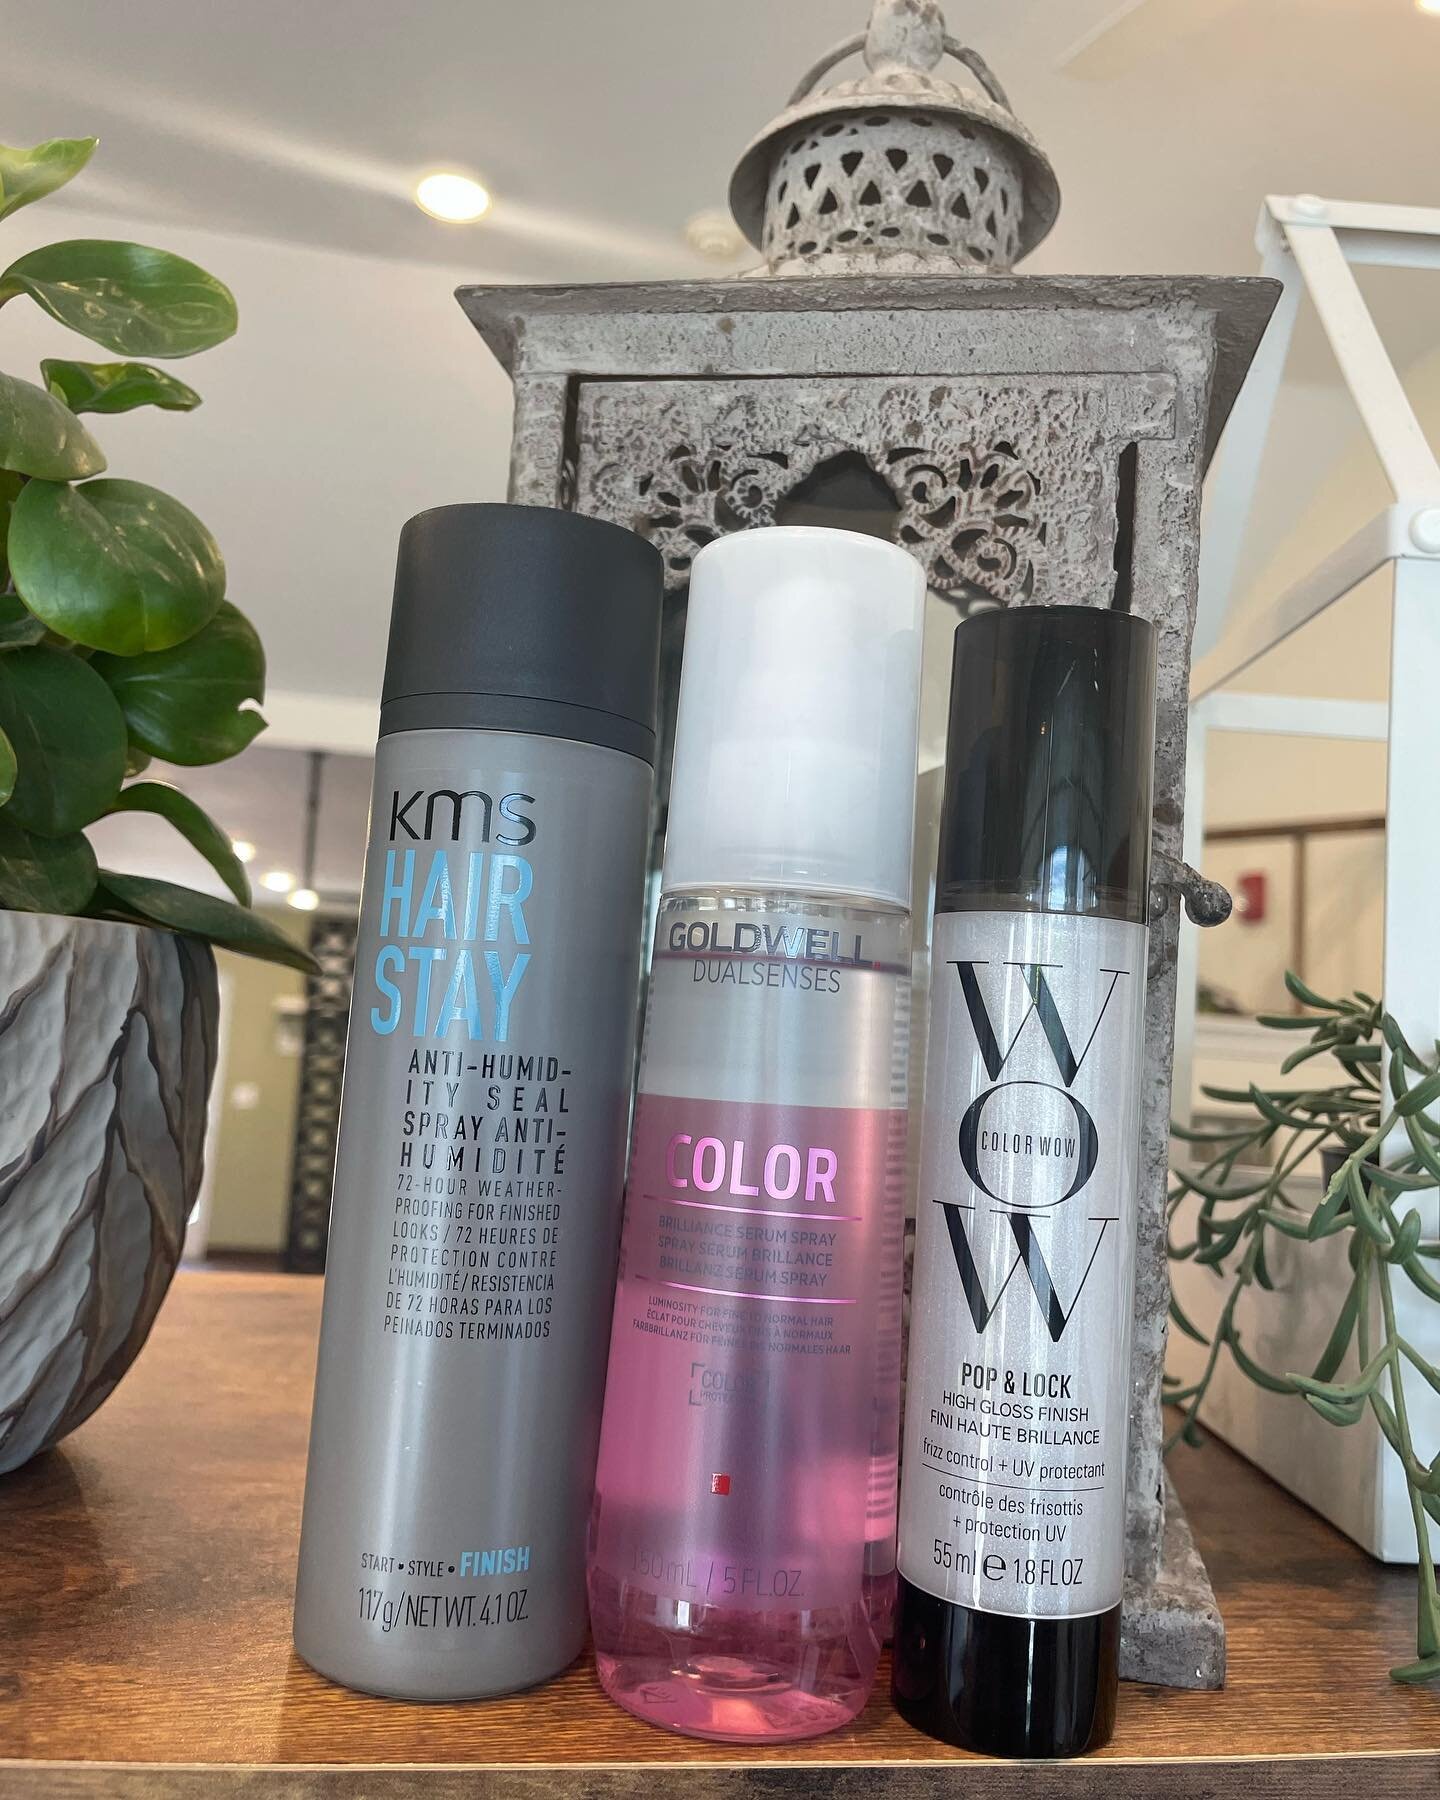 We are halfway through summer! Does your hair need some help? Here are 3 of our favorite summer products. 
KMS Hair Stay is a humidity blocker. We all need a little bit of that on a day like today. 
Goldwell Color Serum Spray offers UV protection. Th